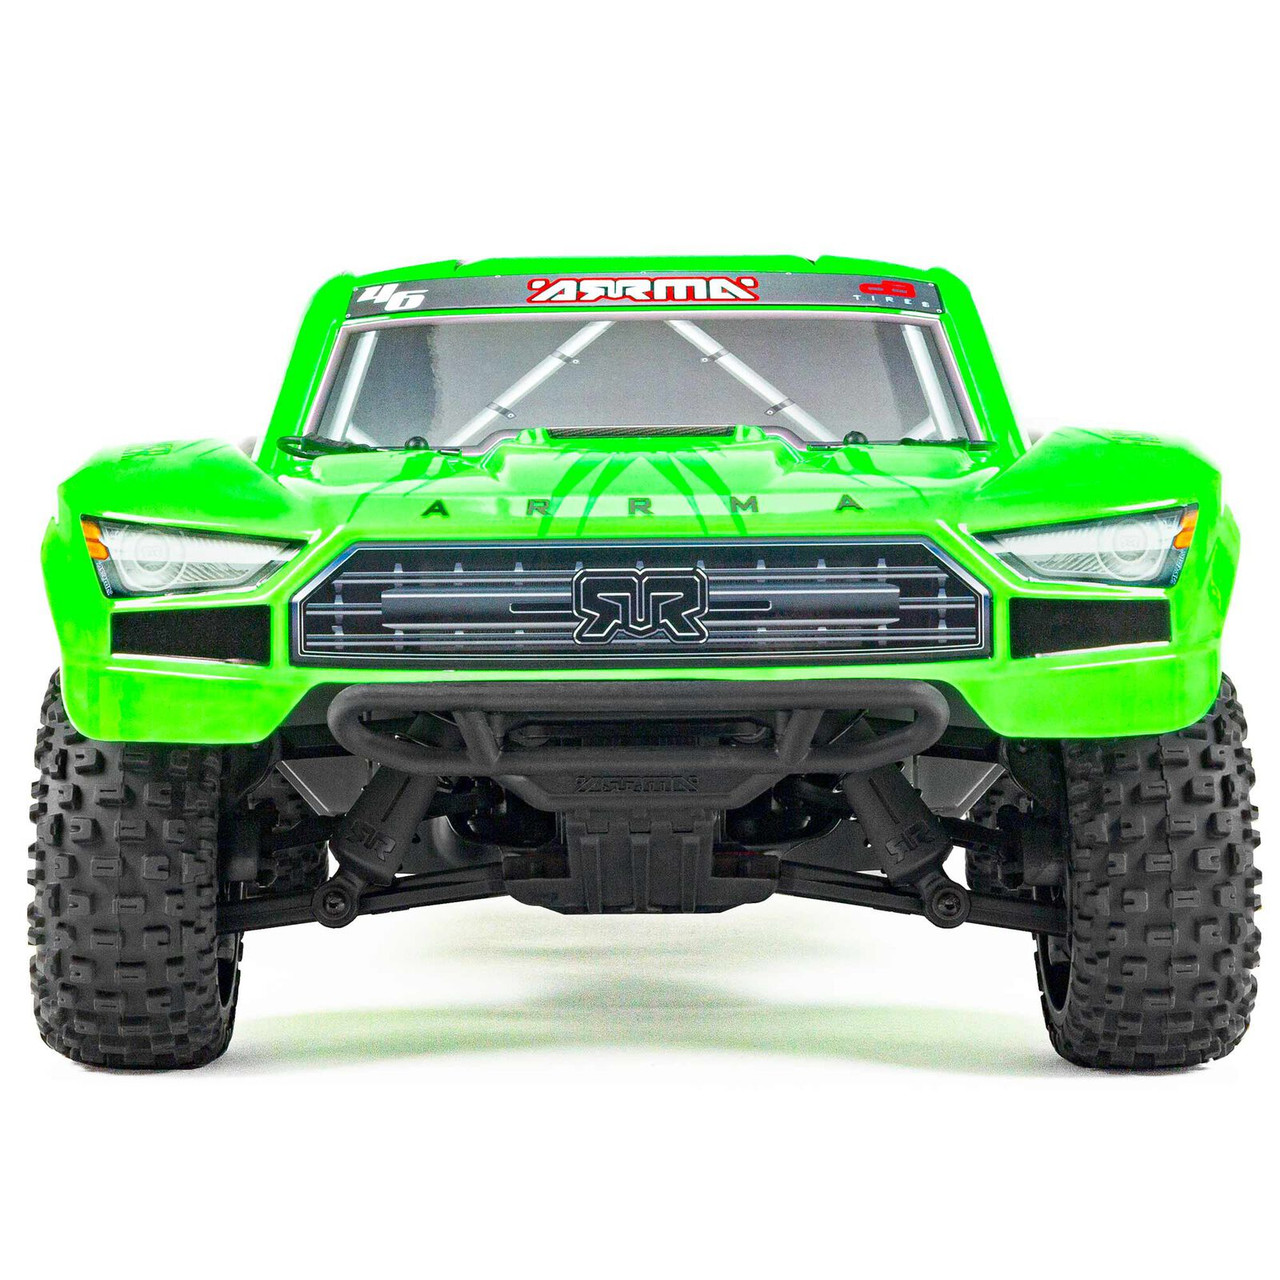 Arrma 1/10 SENTON 4X2 BOOST MEGA 550 Brushed Short Course Truck RTR with Battery & Charger, Green